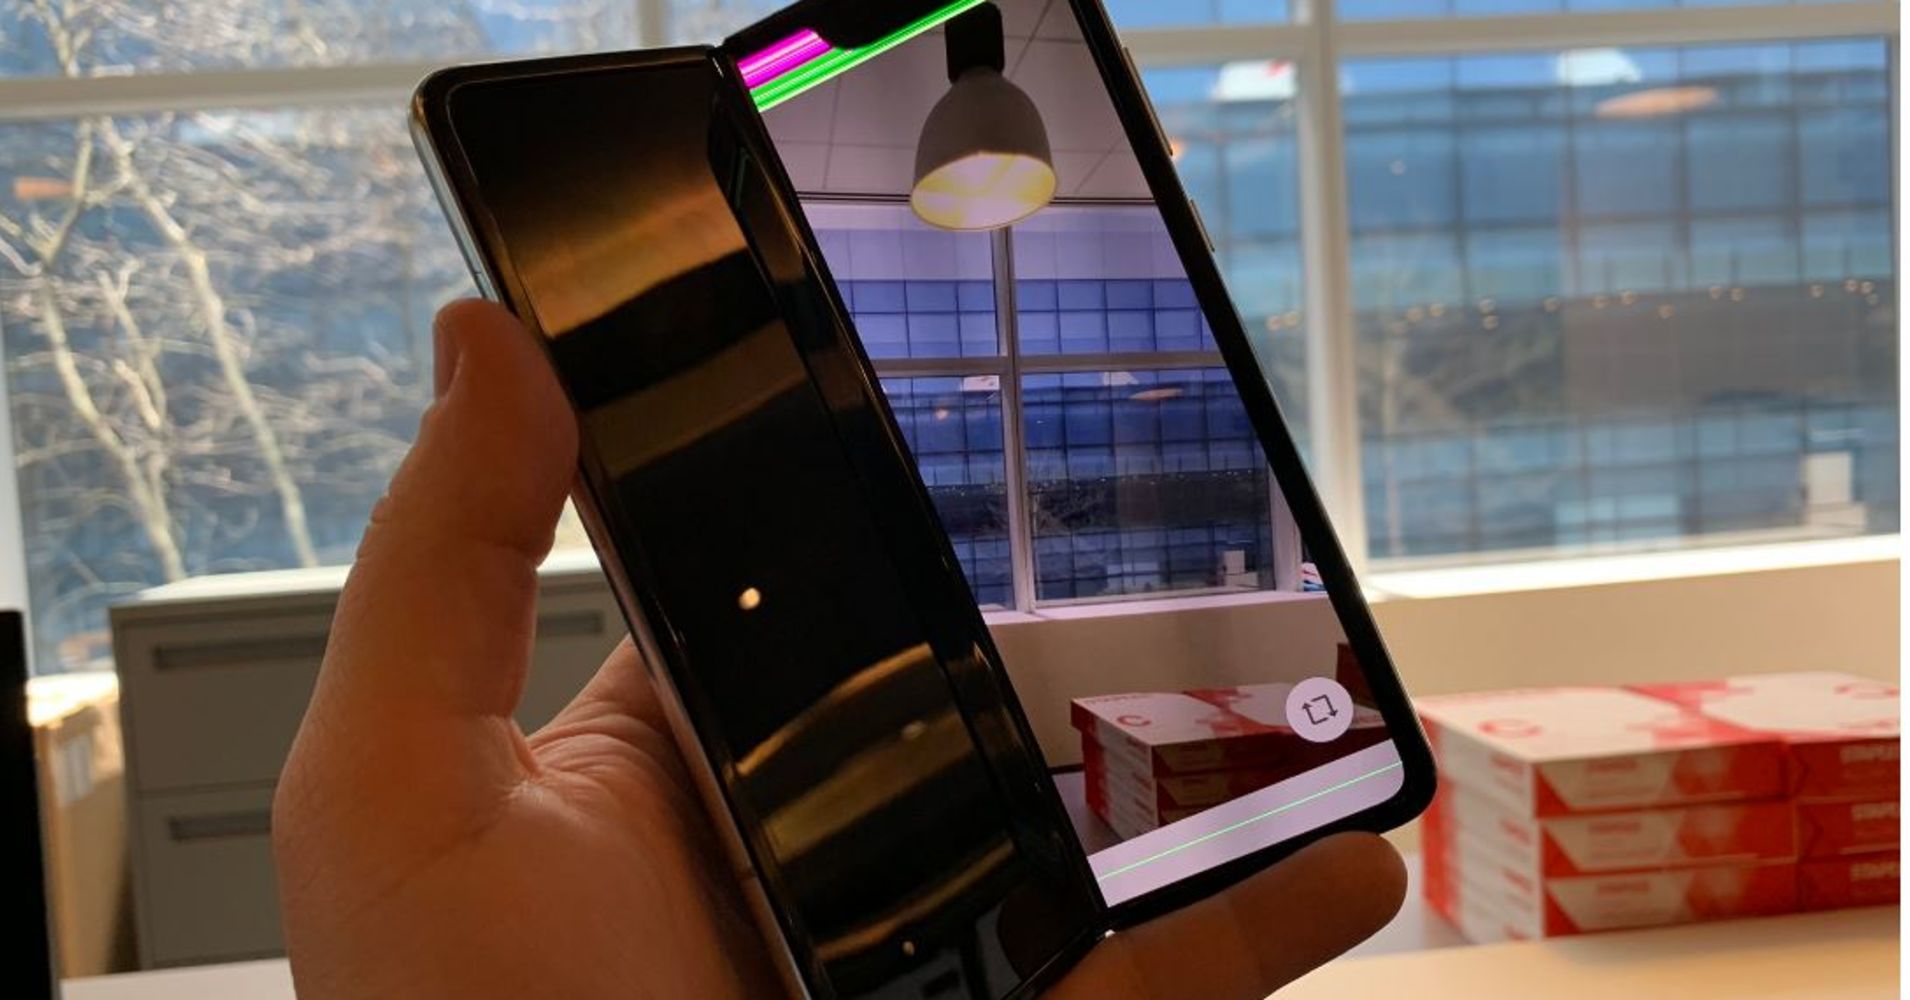 Samsung's Galaxy Fold screen is broken after just two days of use. This phone costs $2,000.